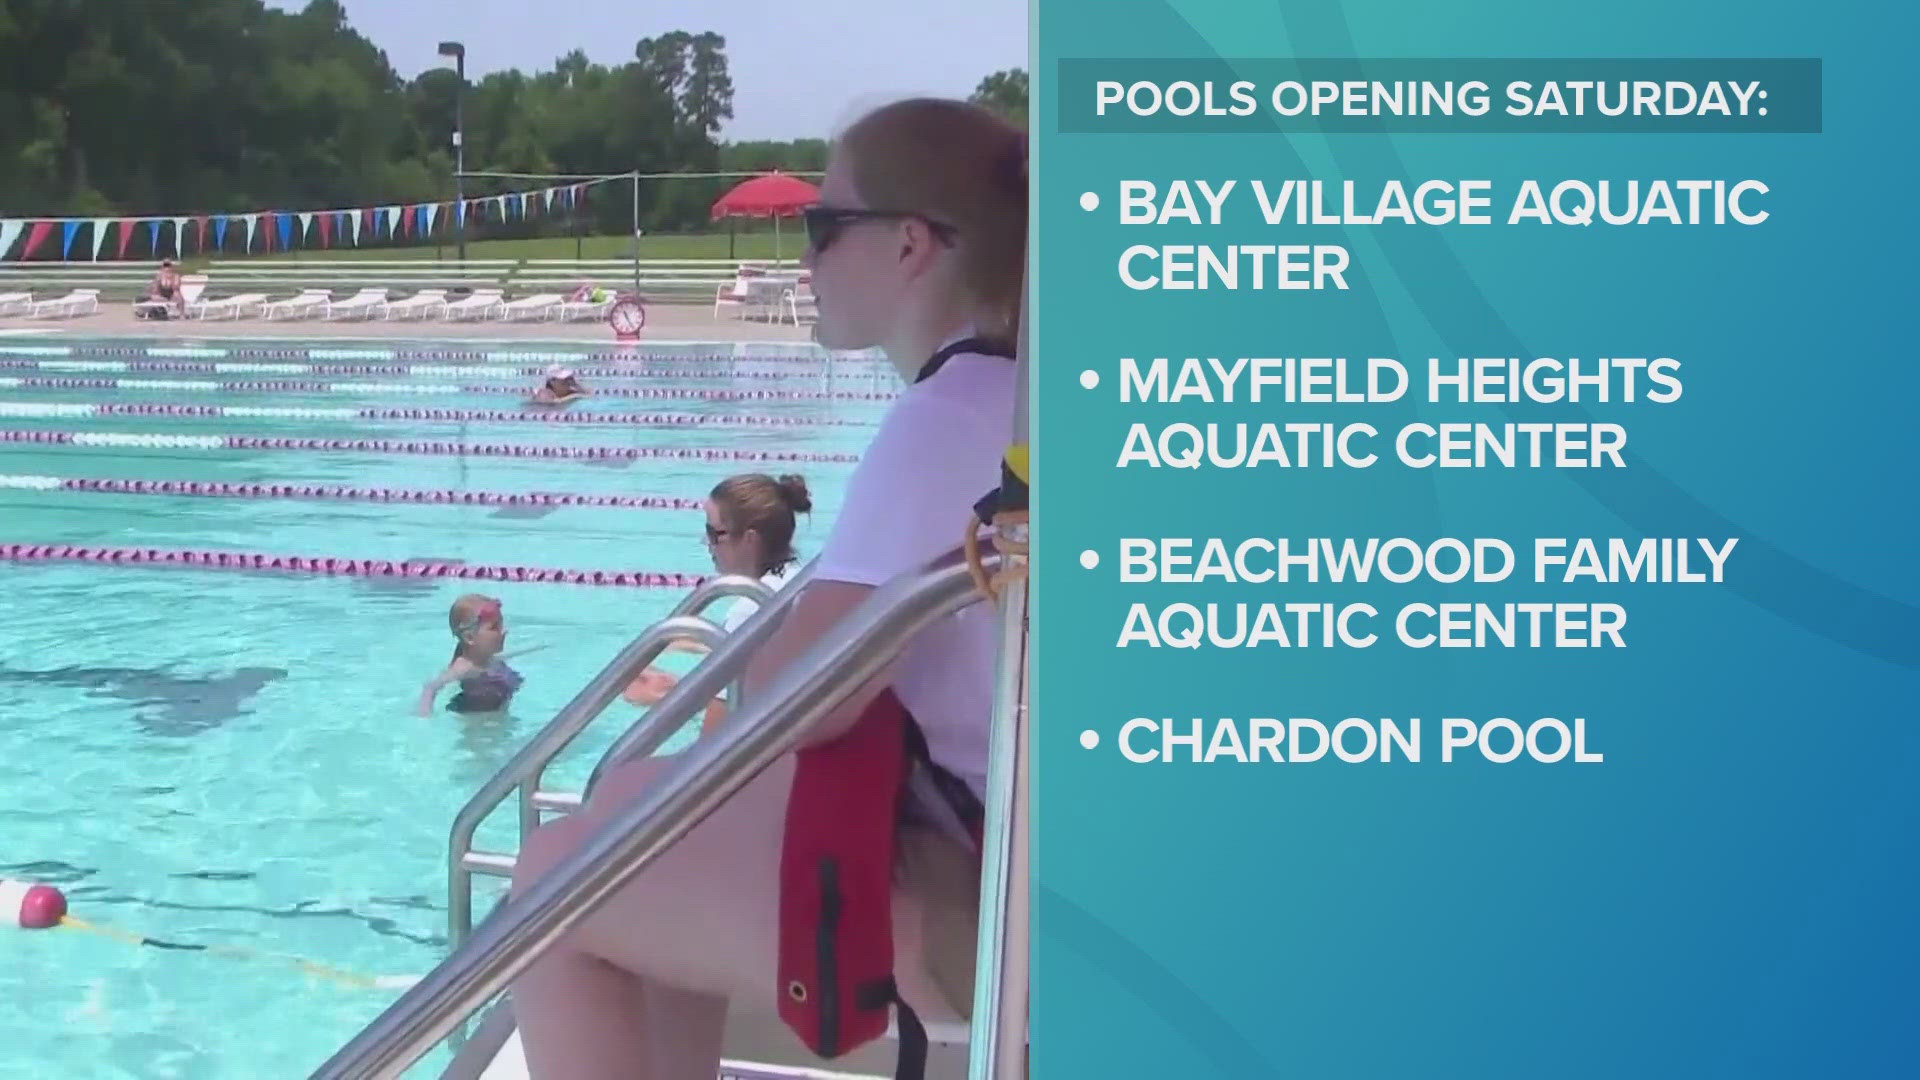 3News has compiled a list of pools and splashpads in Northeast Ohio.